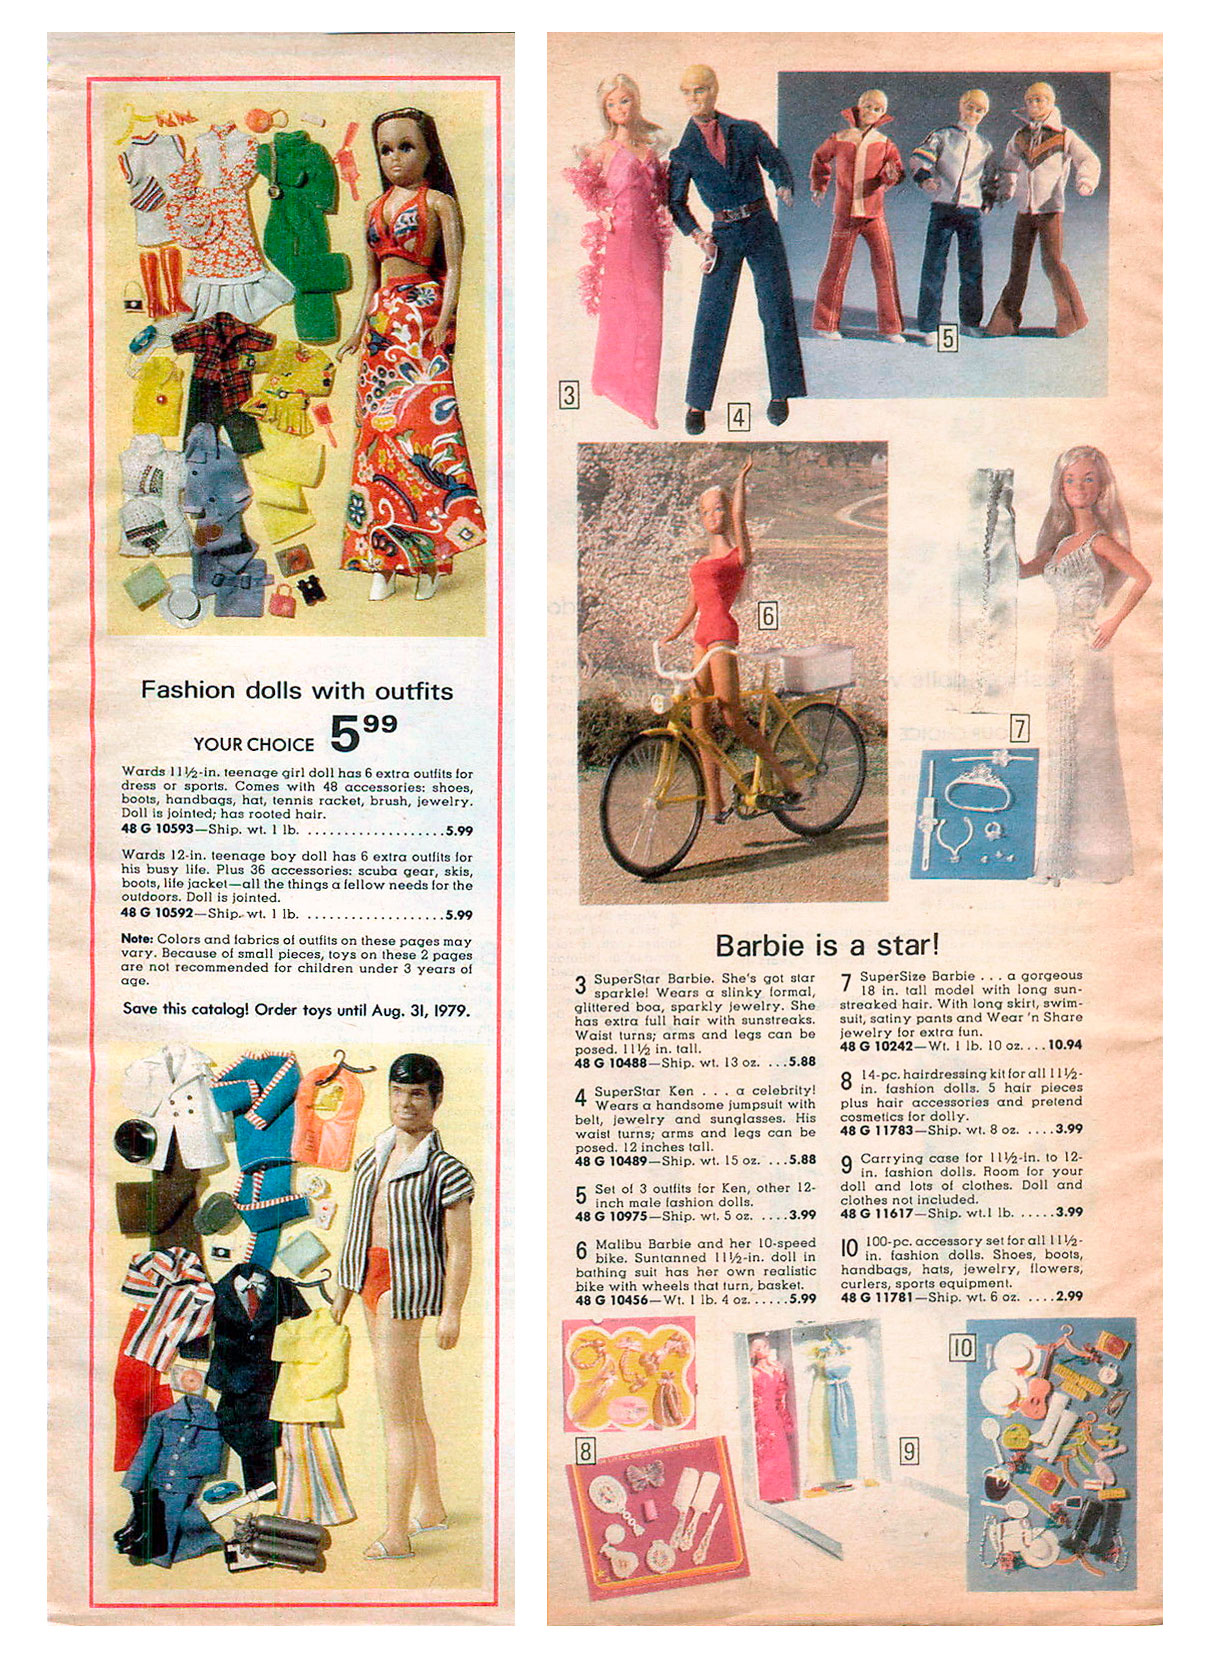 From 1978 Montgomery Ward Christmas catalogue